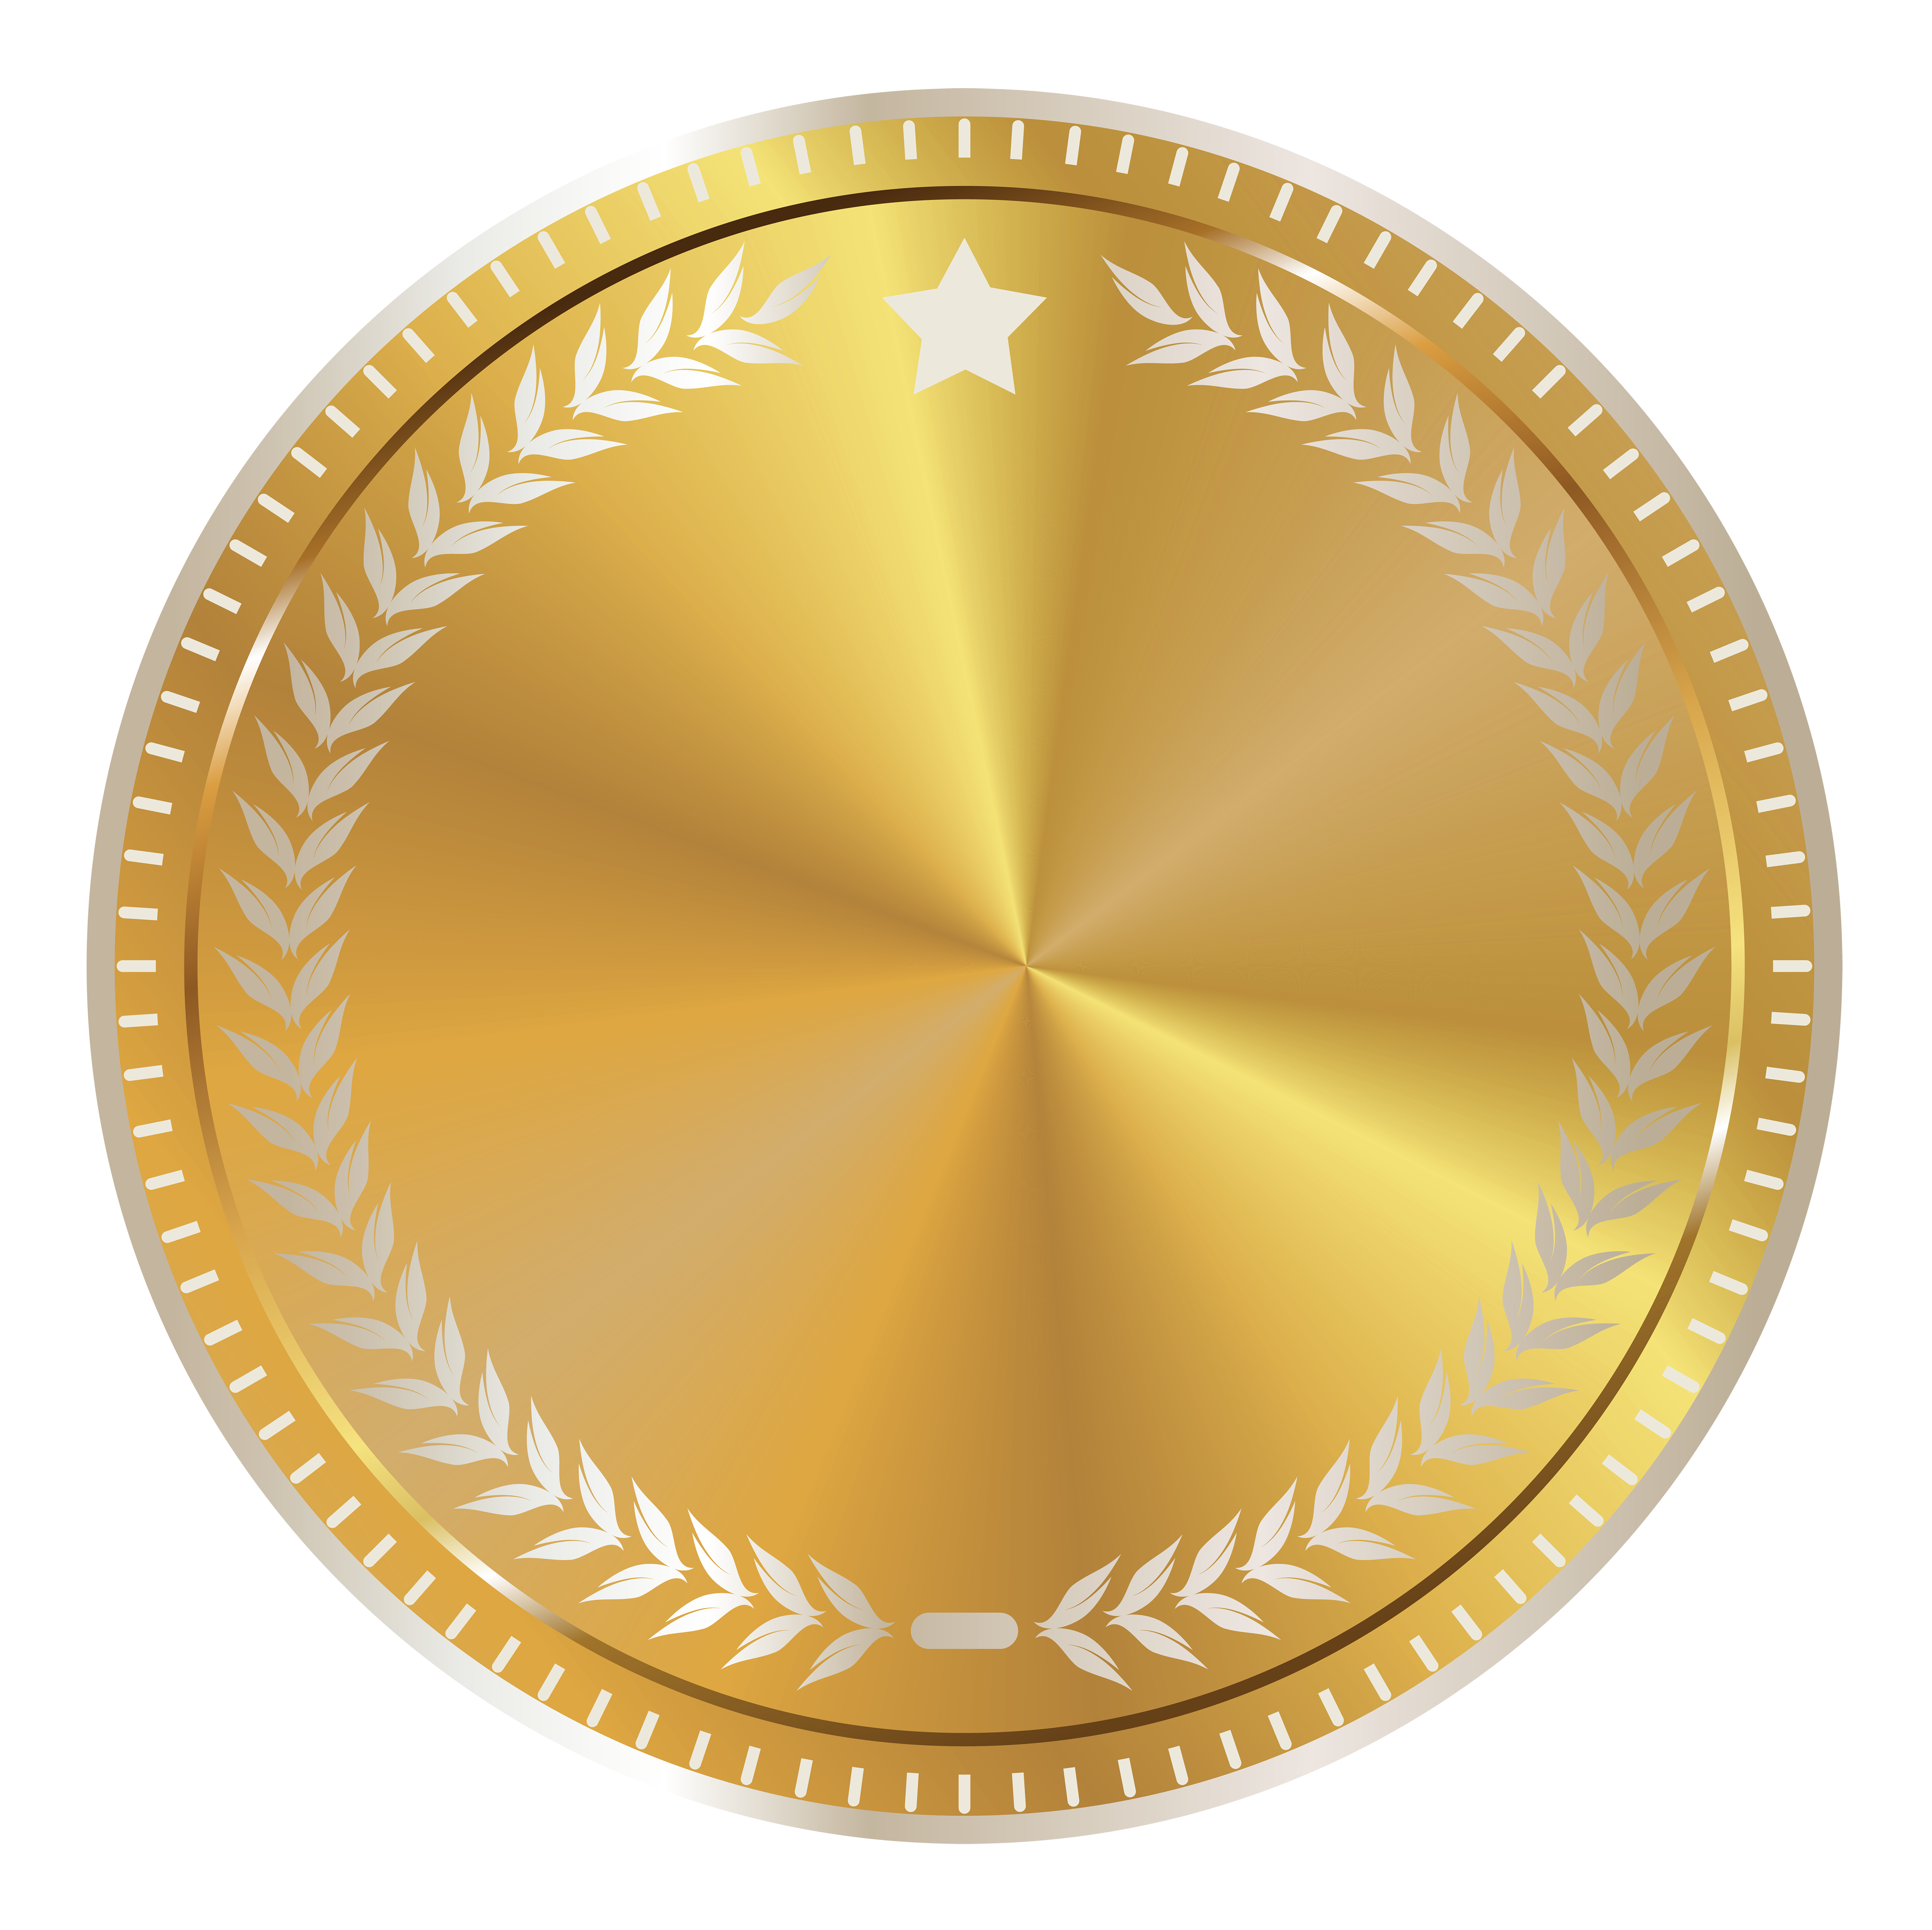 Gold Seal Badge with Decoration PNG Clipart Image | Gallery ...